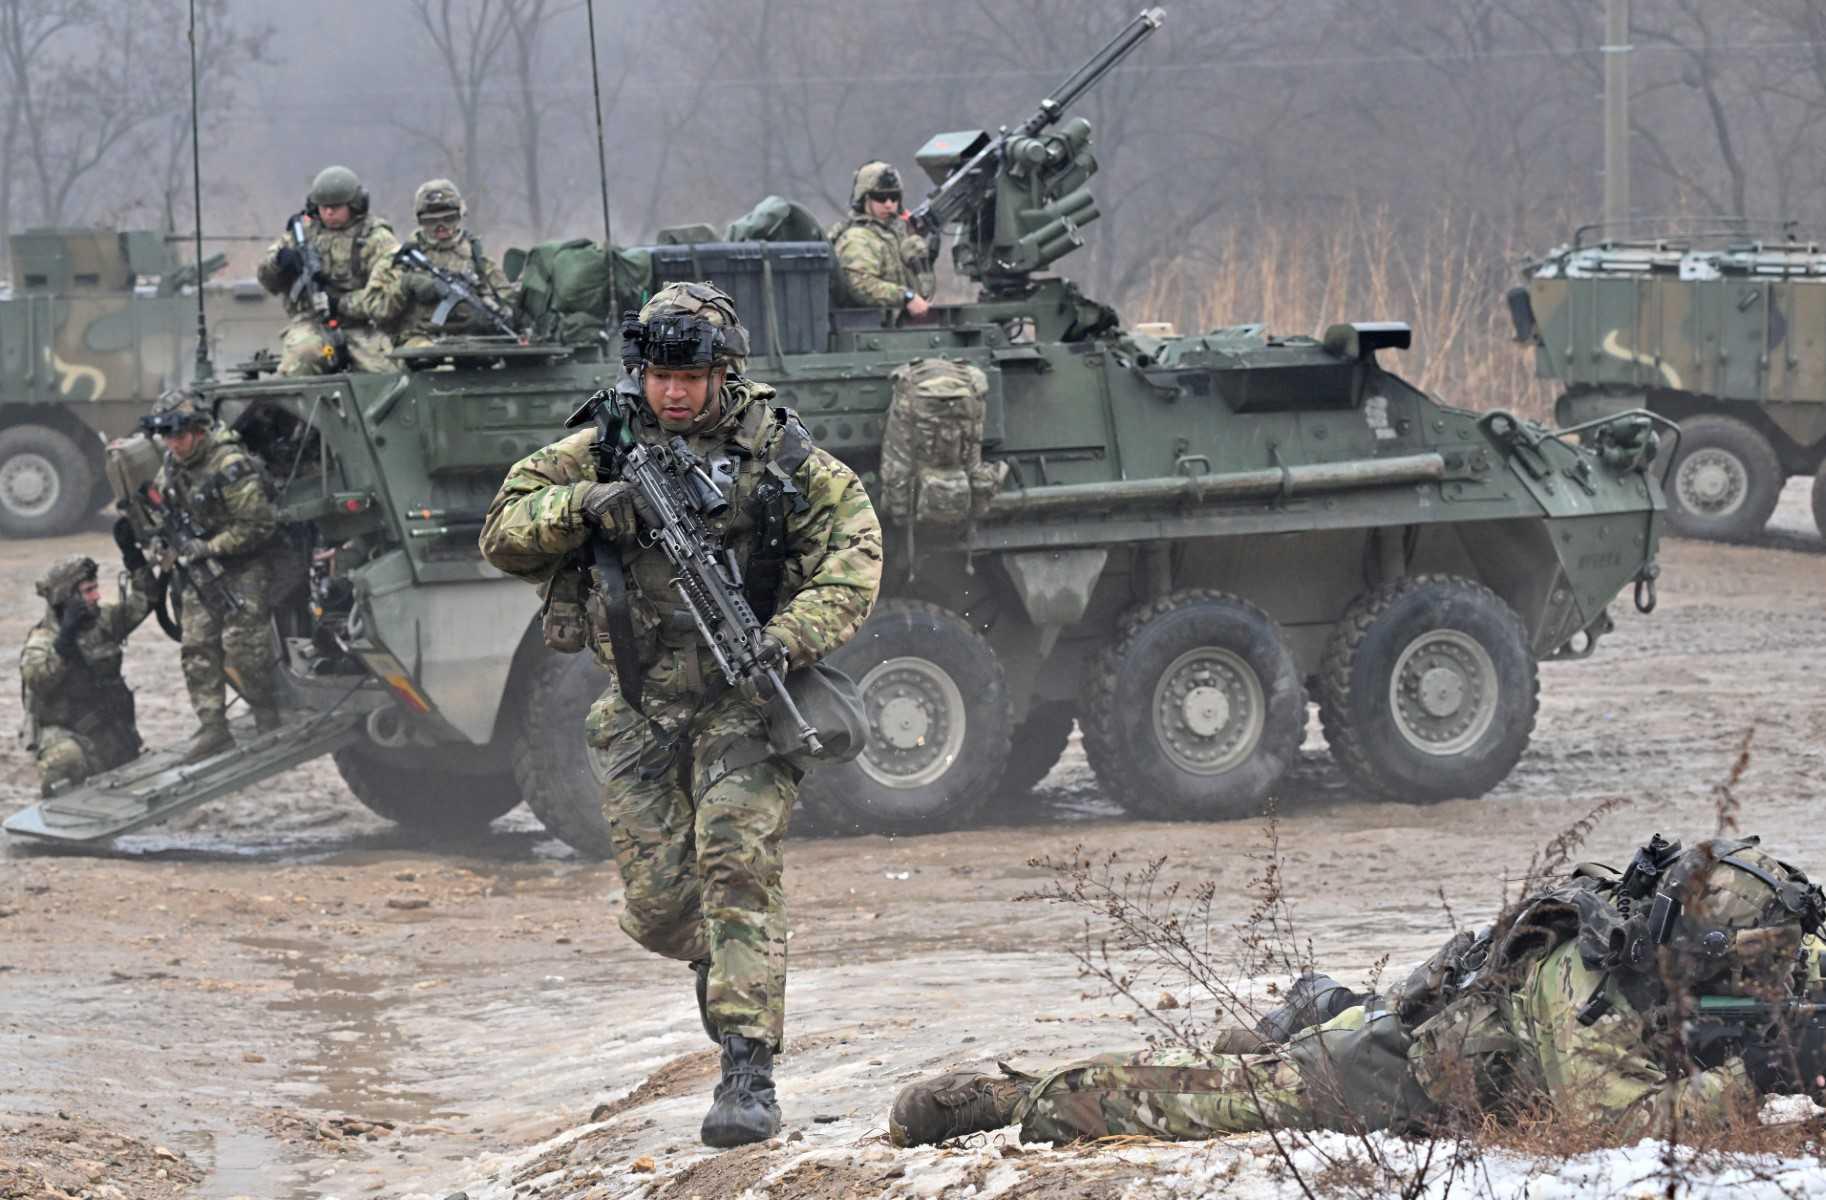 US soldiers participate in a joint military drill between the US 2nd Infantry Division Stryker Battalion and the ROK 25th Infantry Division Army Tiger Demonstration Brigade at a training field in Paju on Jan 13. Photo: Reuters